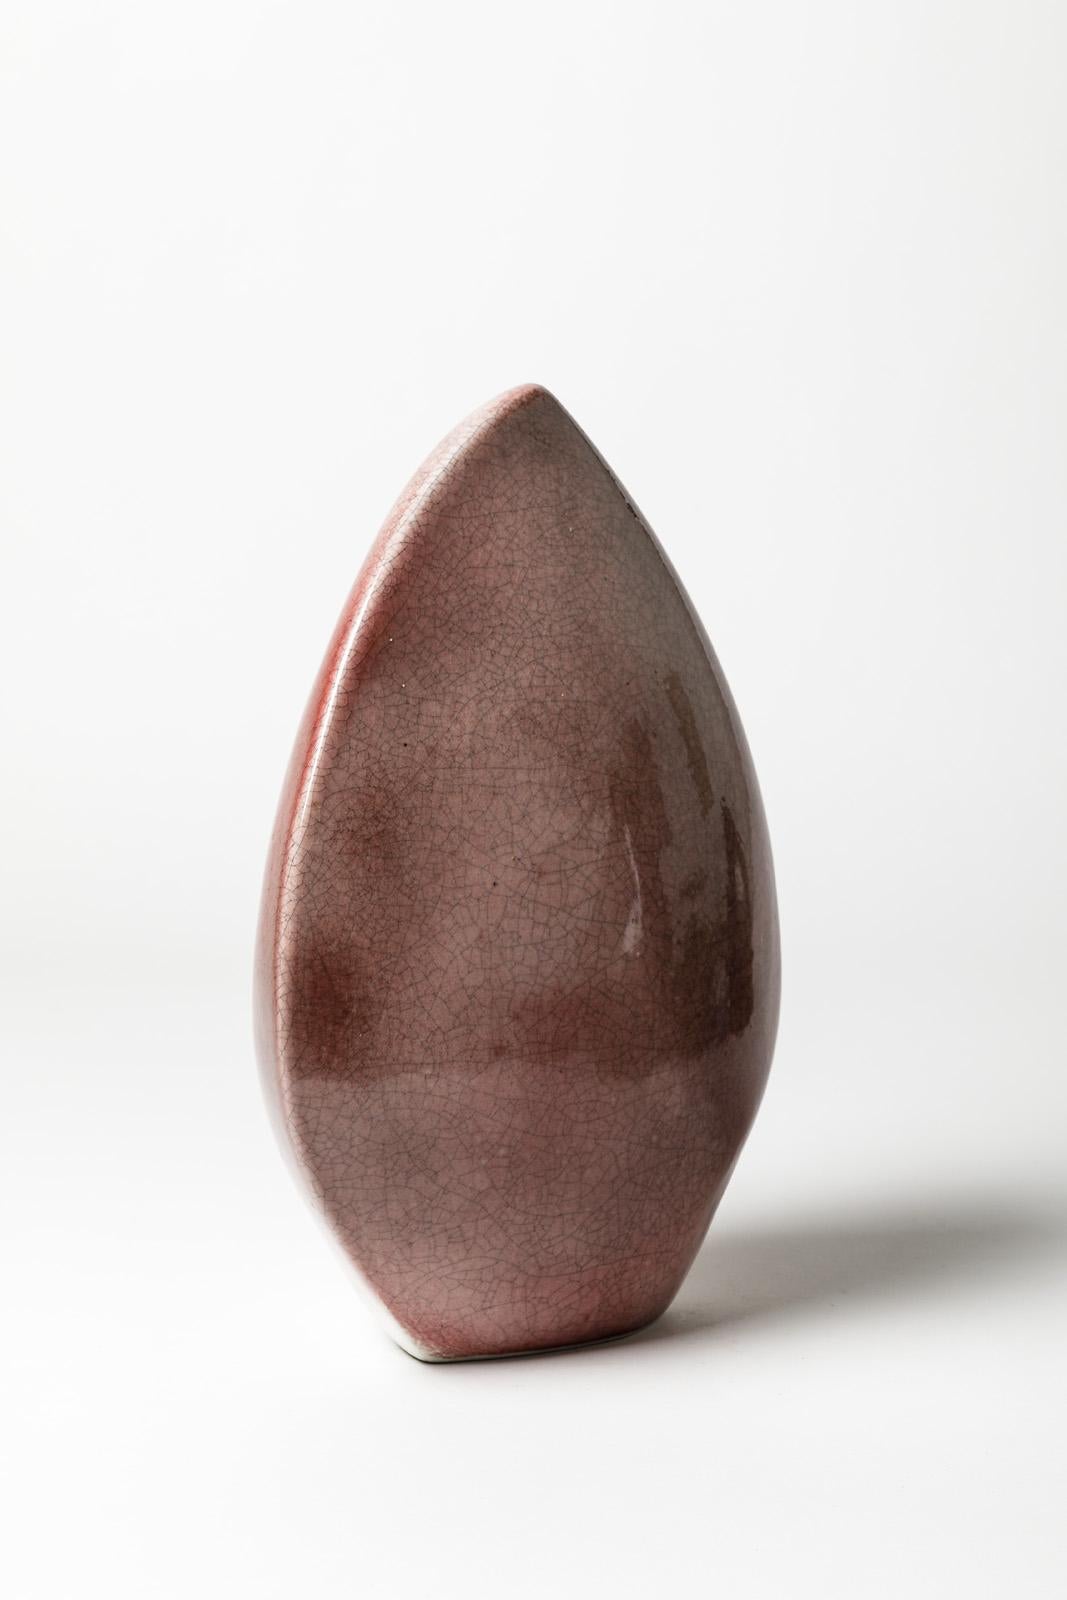 20th Century Porcelain Sculpture with Pink Glaze Decoration by Tim Orr, circa 1970